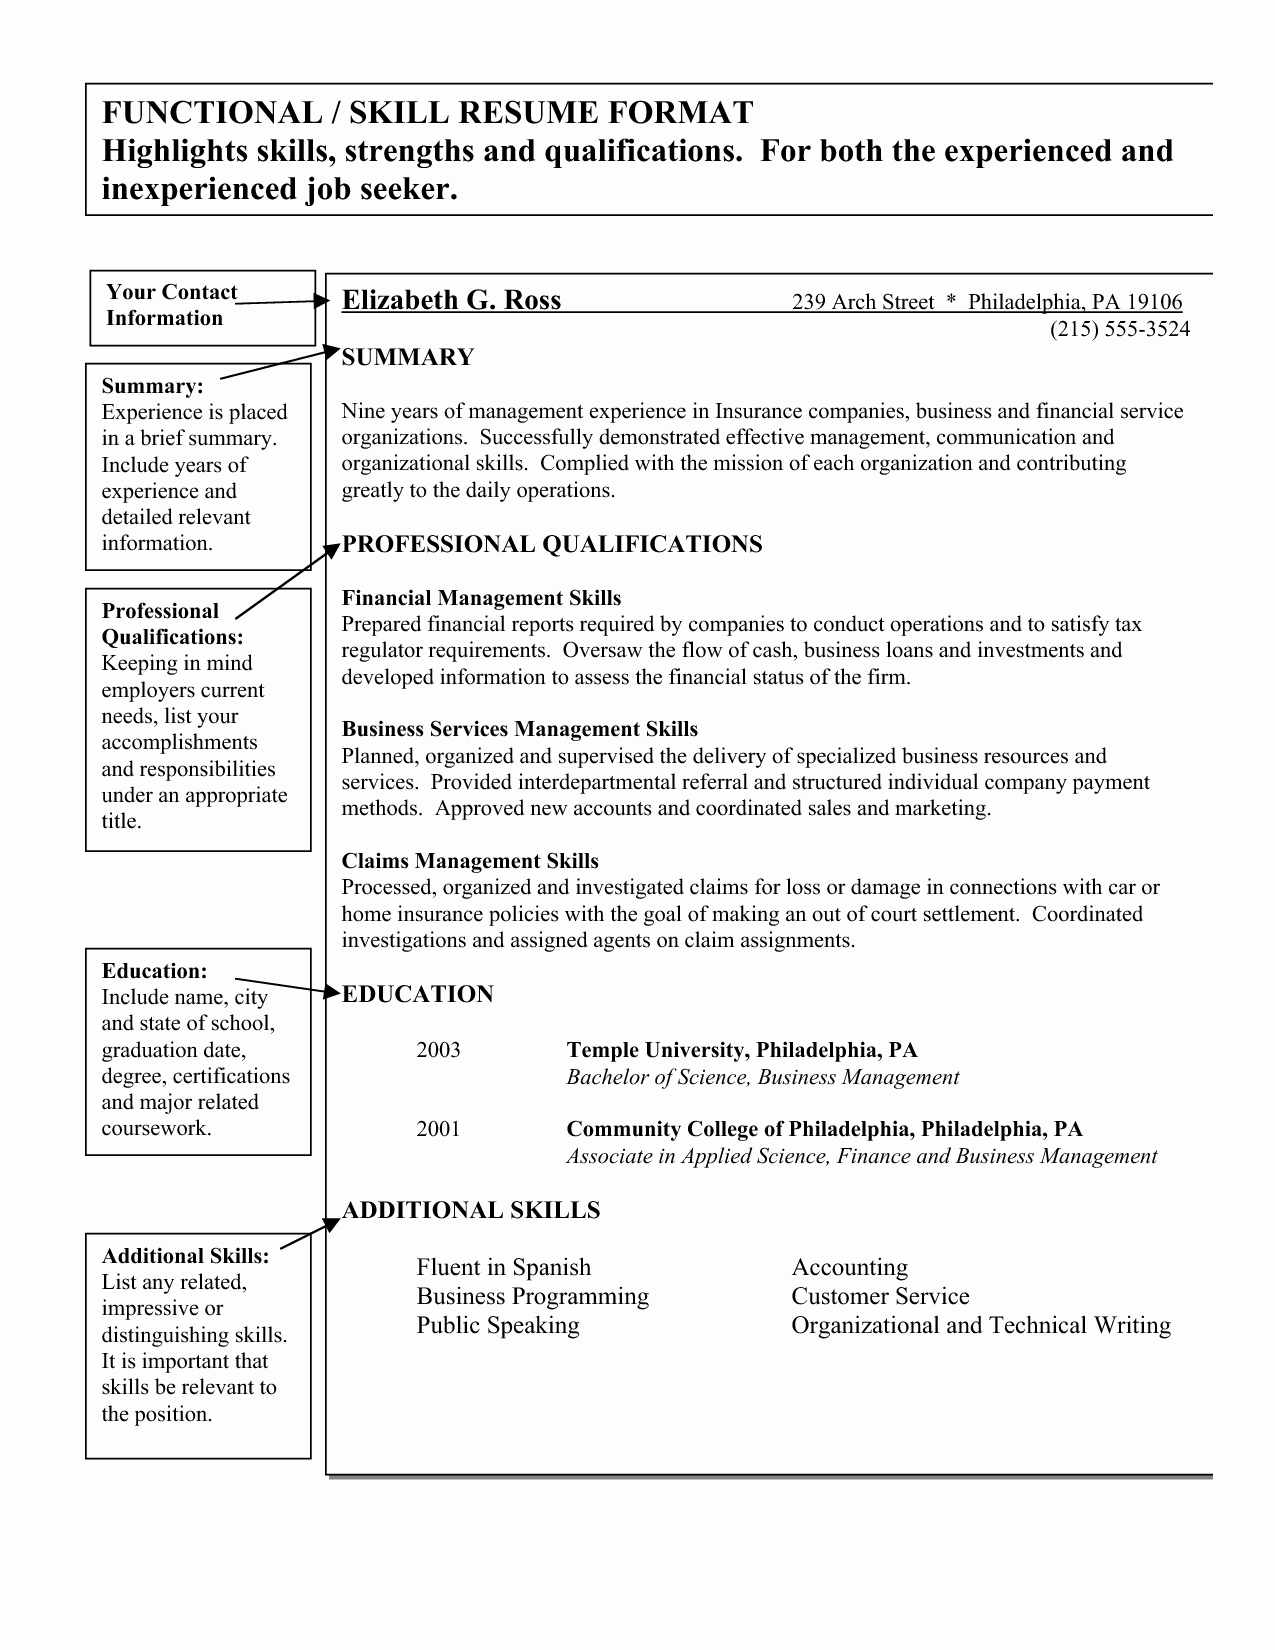 Resume Skills List Best Template Collection